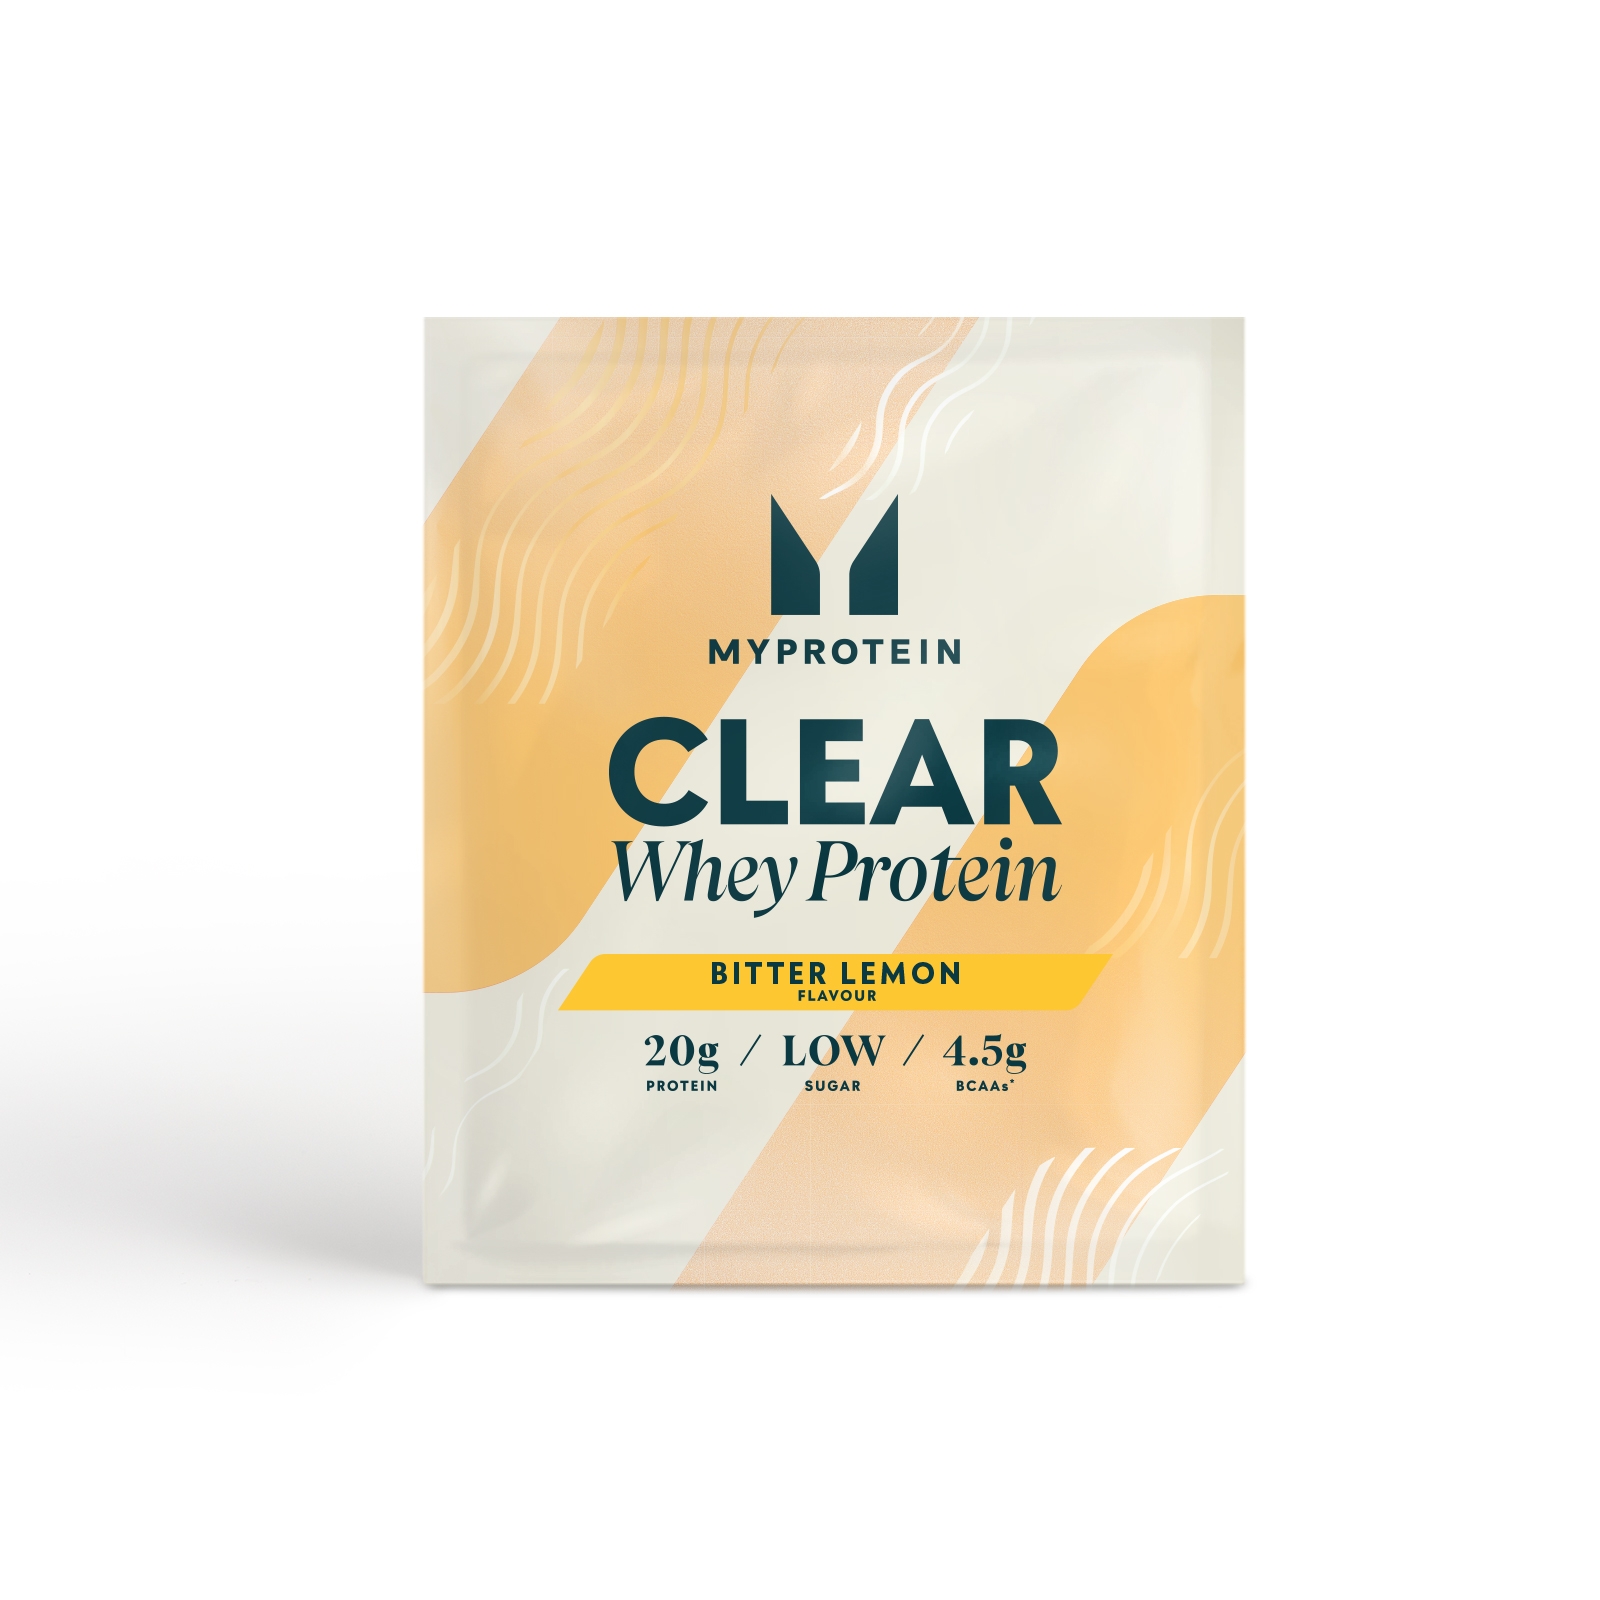 Image of Myprotein Clear Whey Isolate (Sample) - 1servings - Bitter lemon